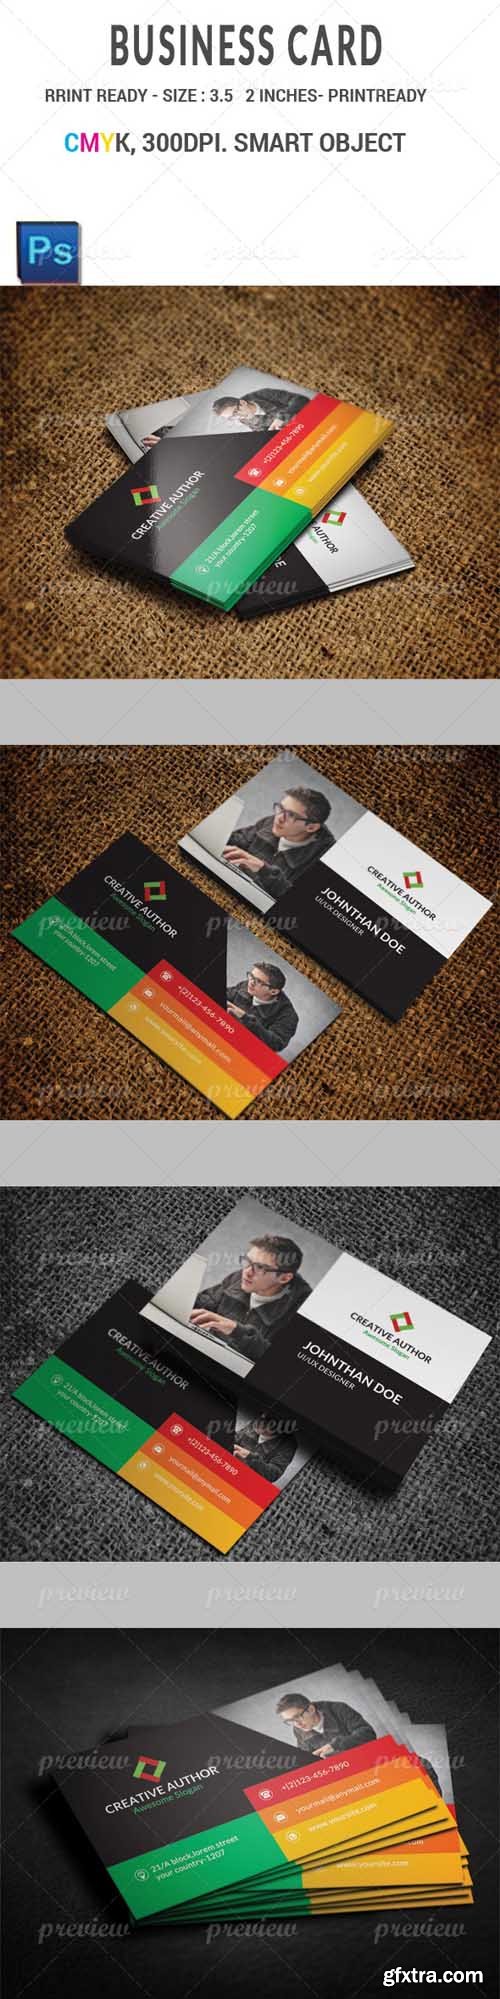 Agency Corporate Business Card